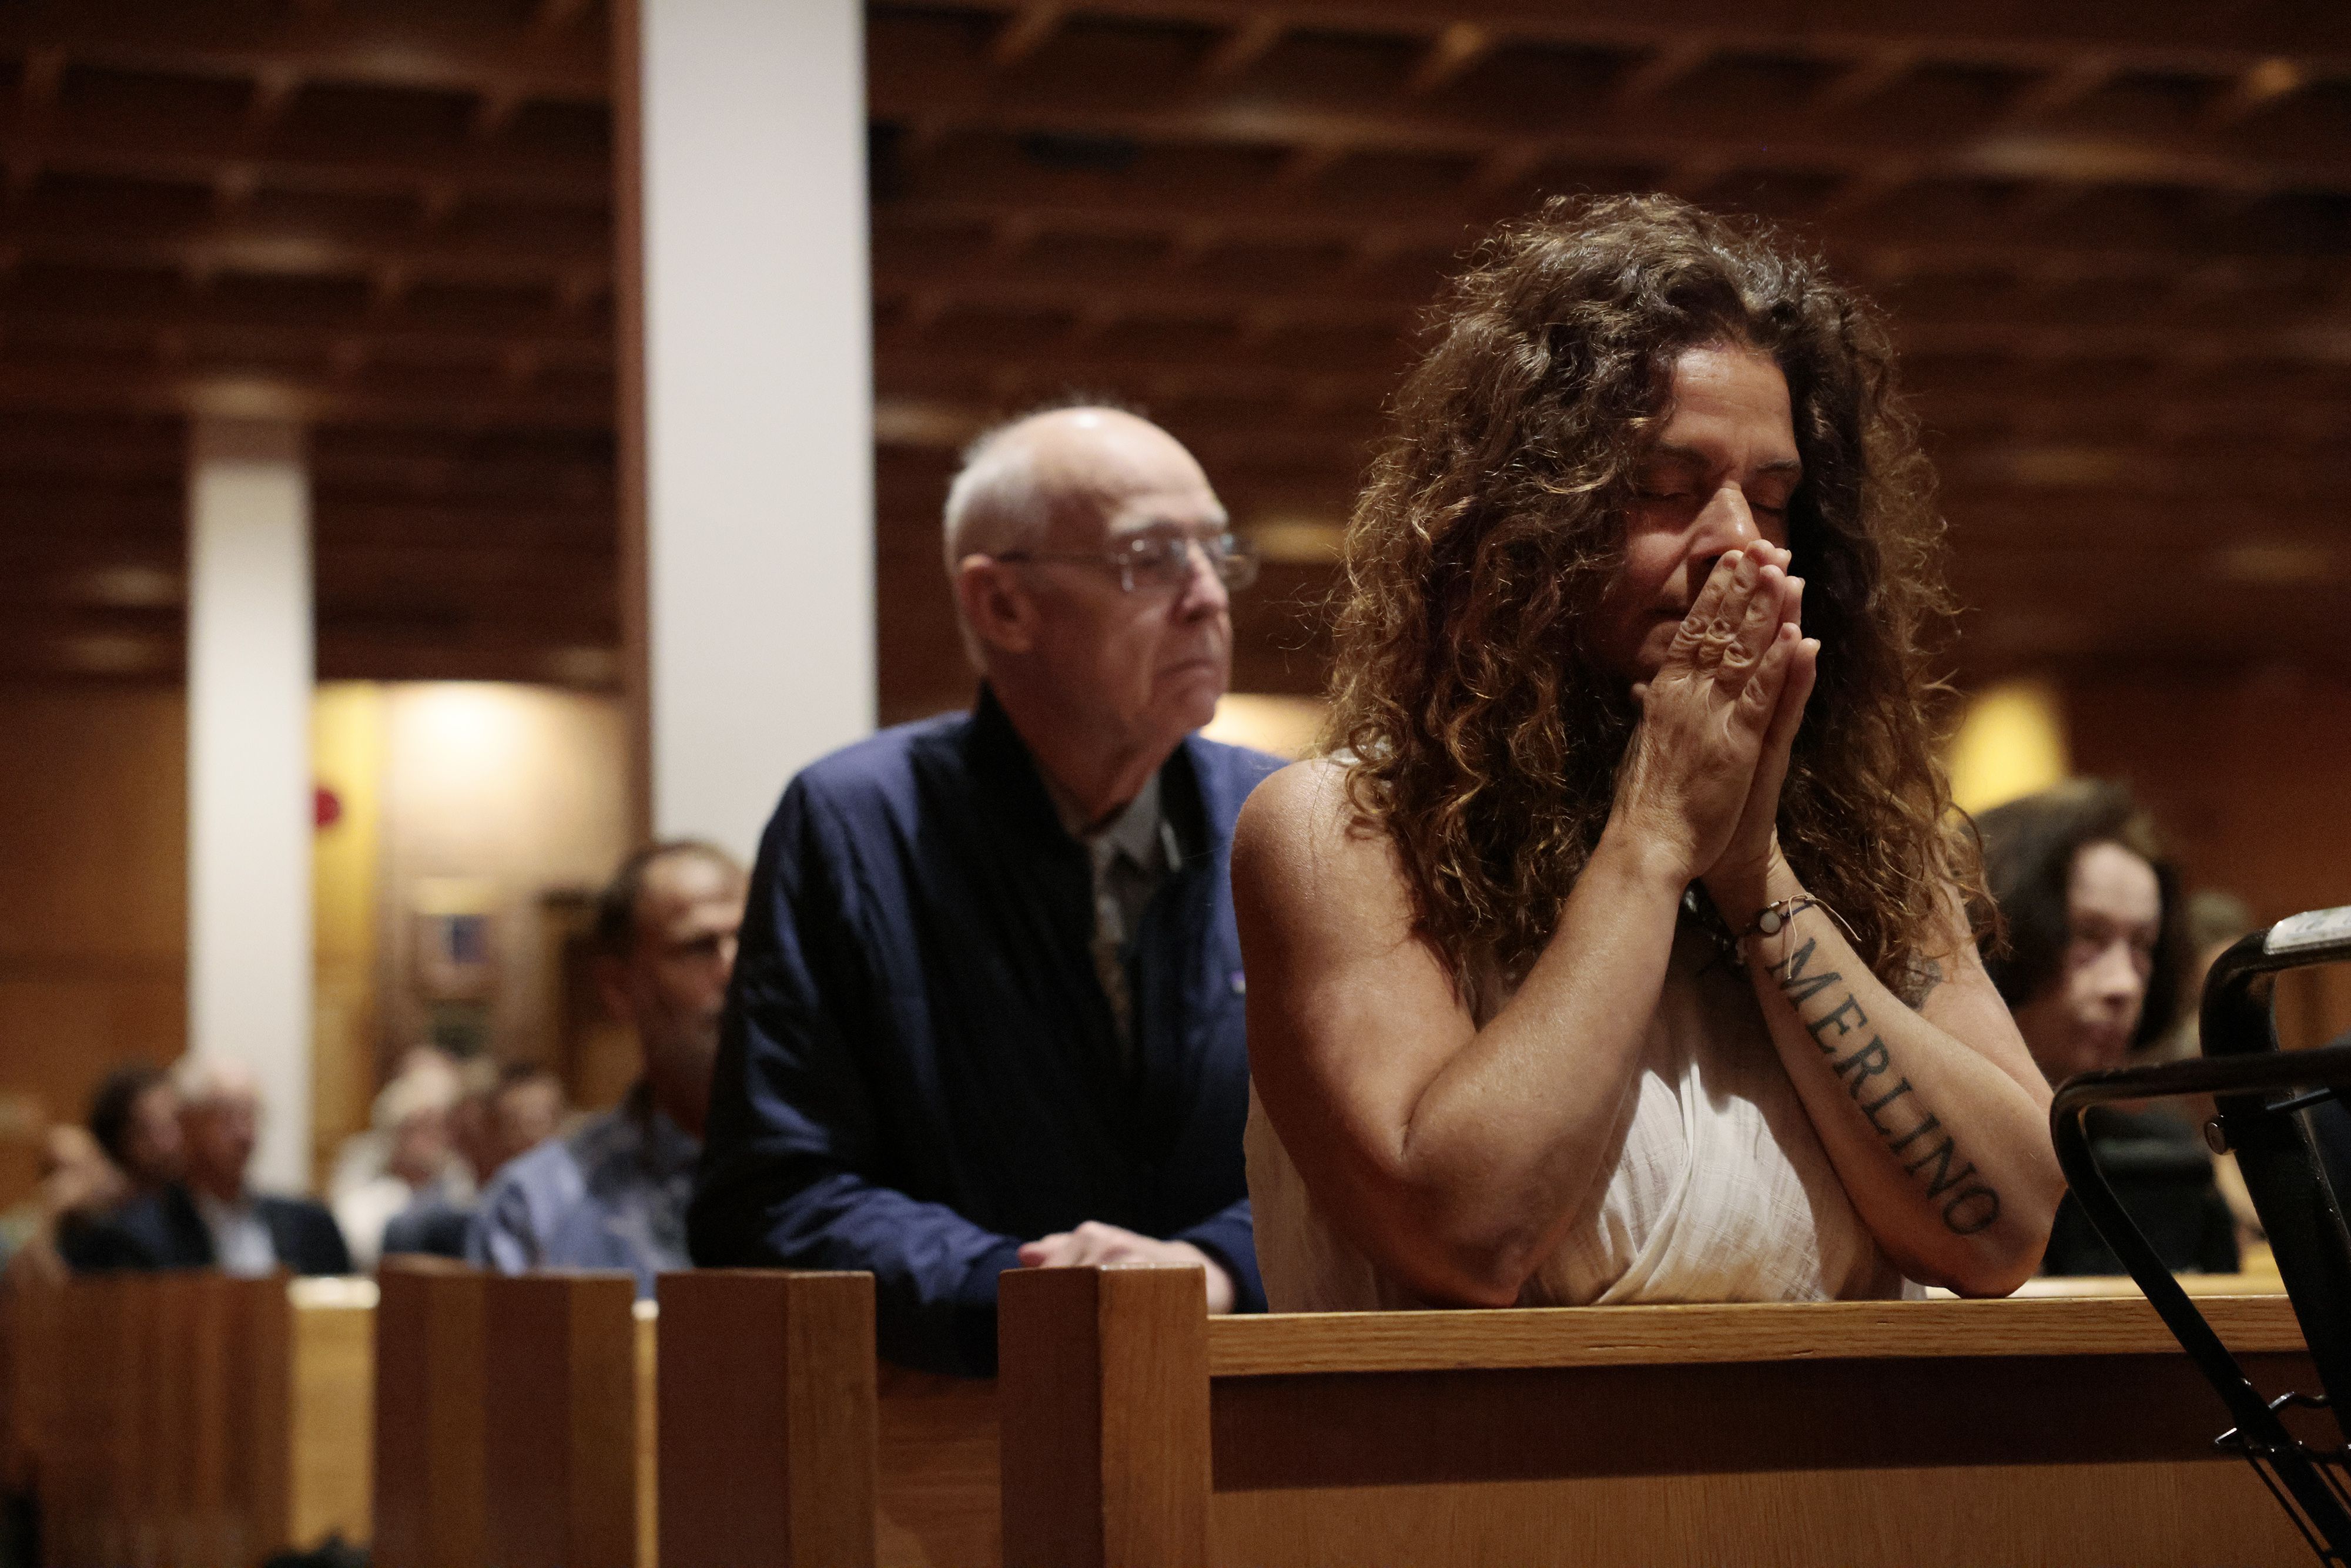 A woman clasped her hands in prayer during a memorial service Sunday at Logan Airport's Our Lady of the Airways chapel for the passengers and crew who were killed in 1973 on Delta Flight 723.